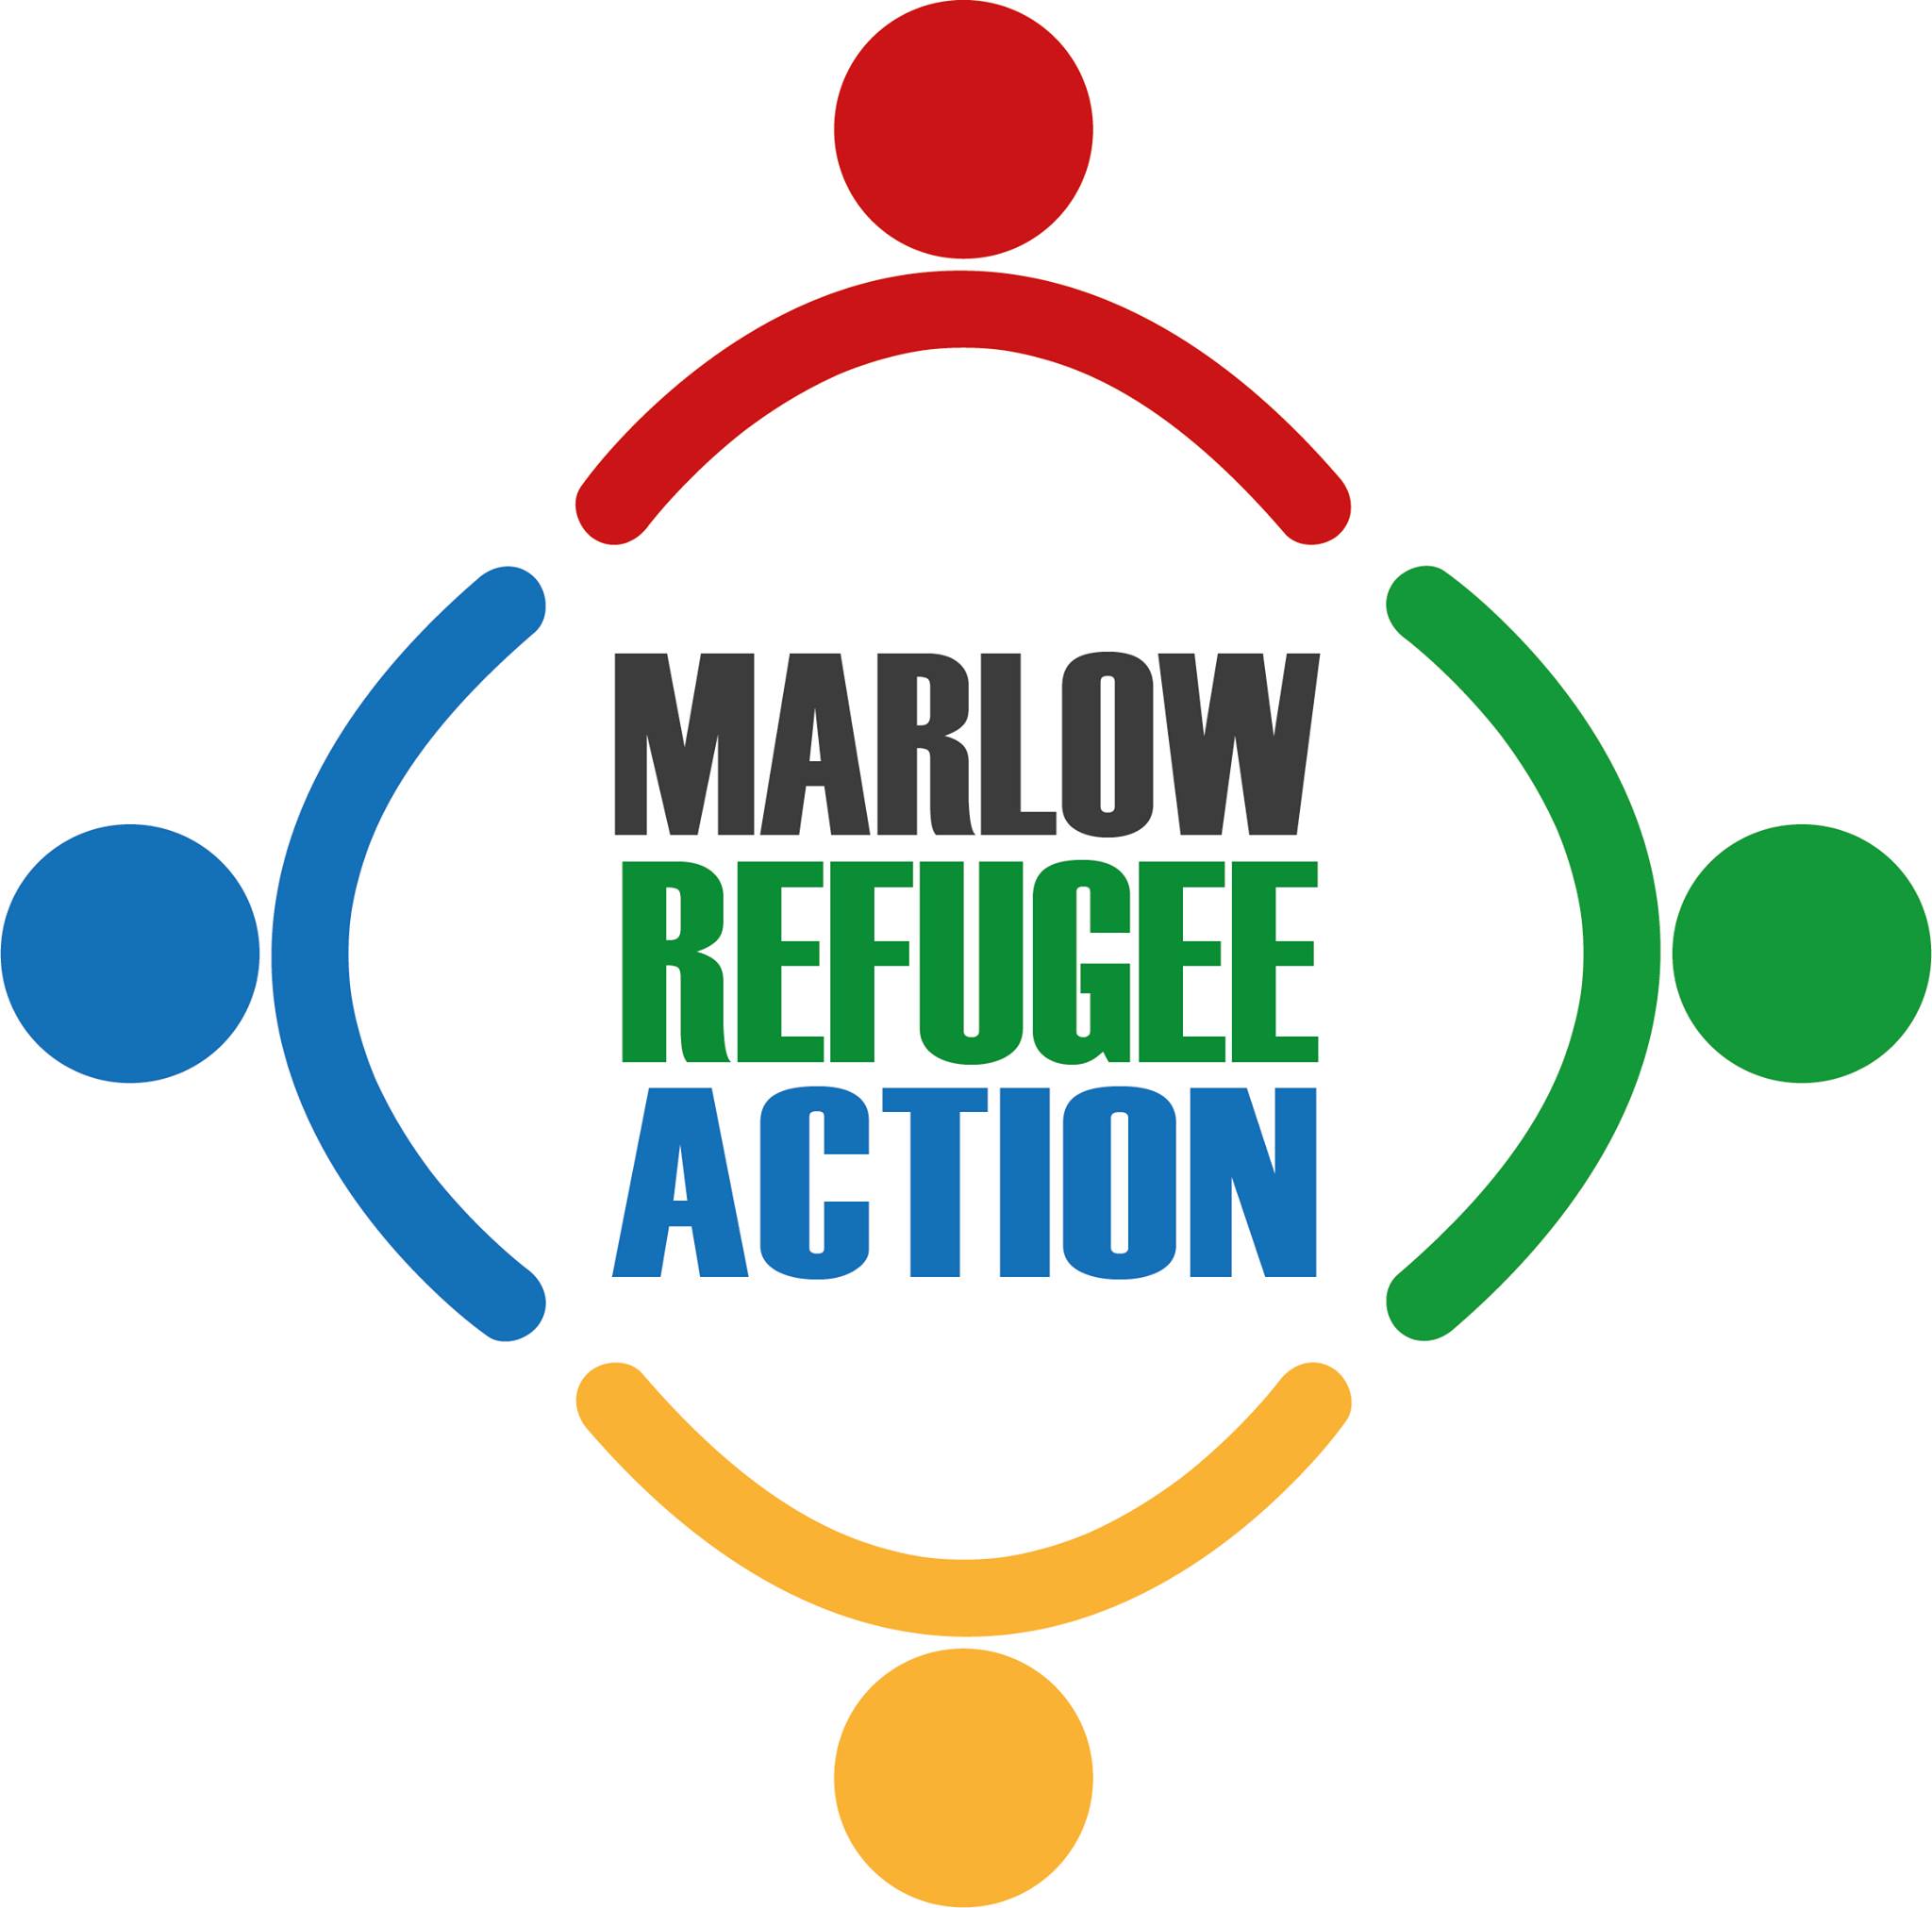 Marlow Refugee Action